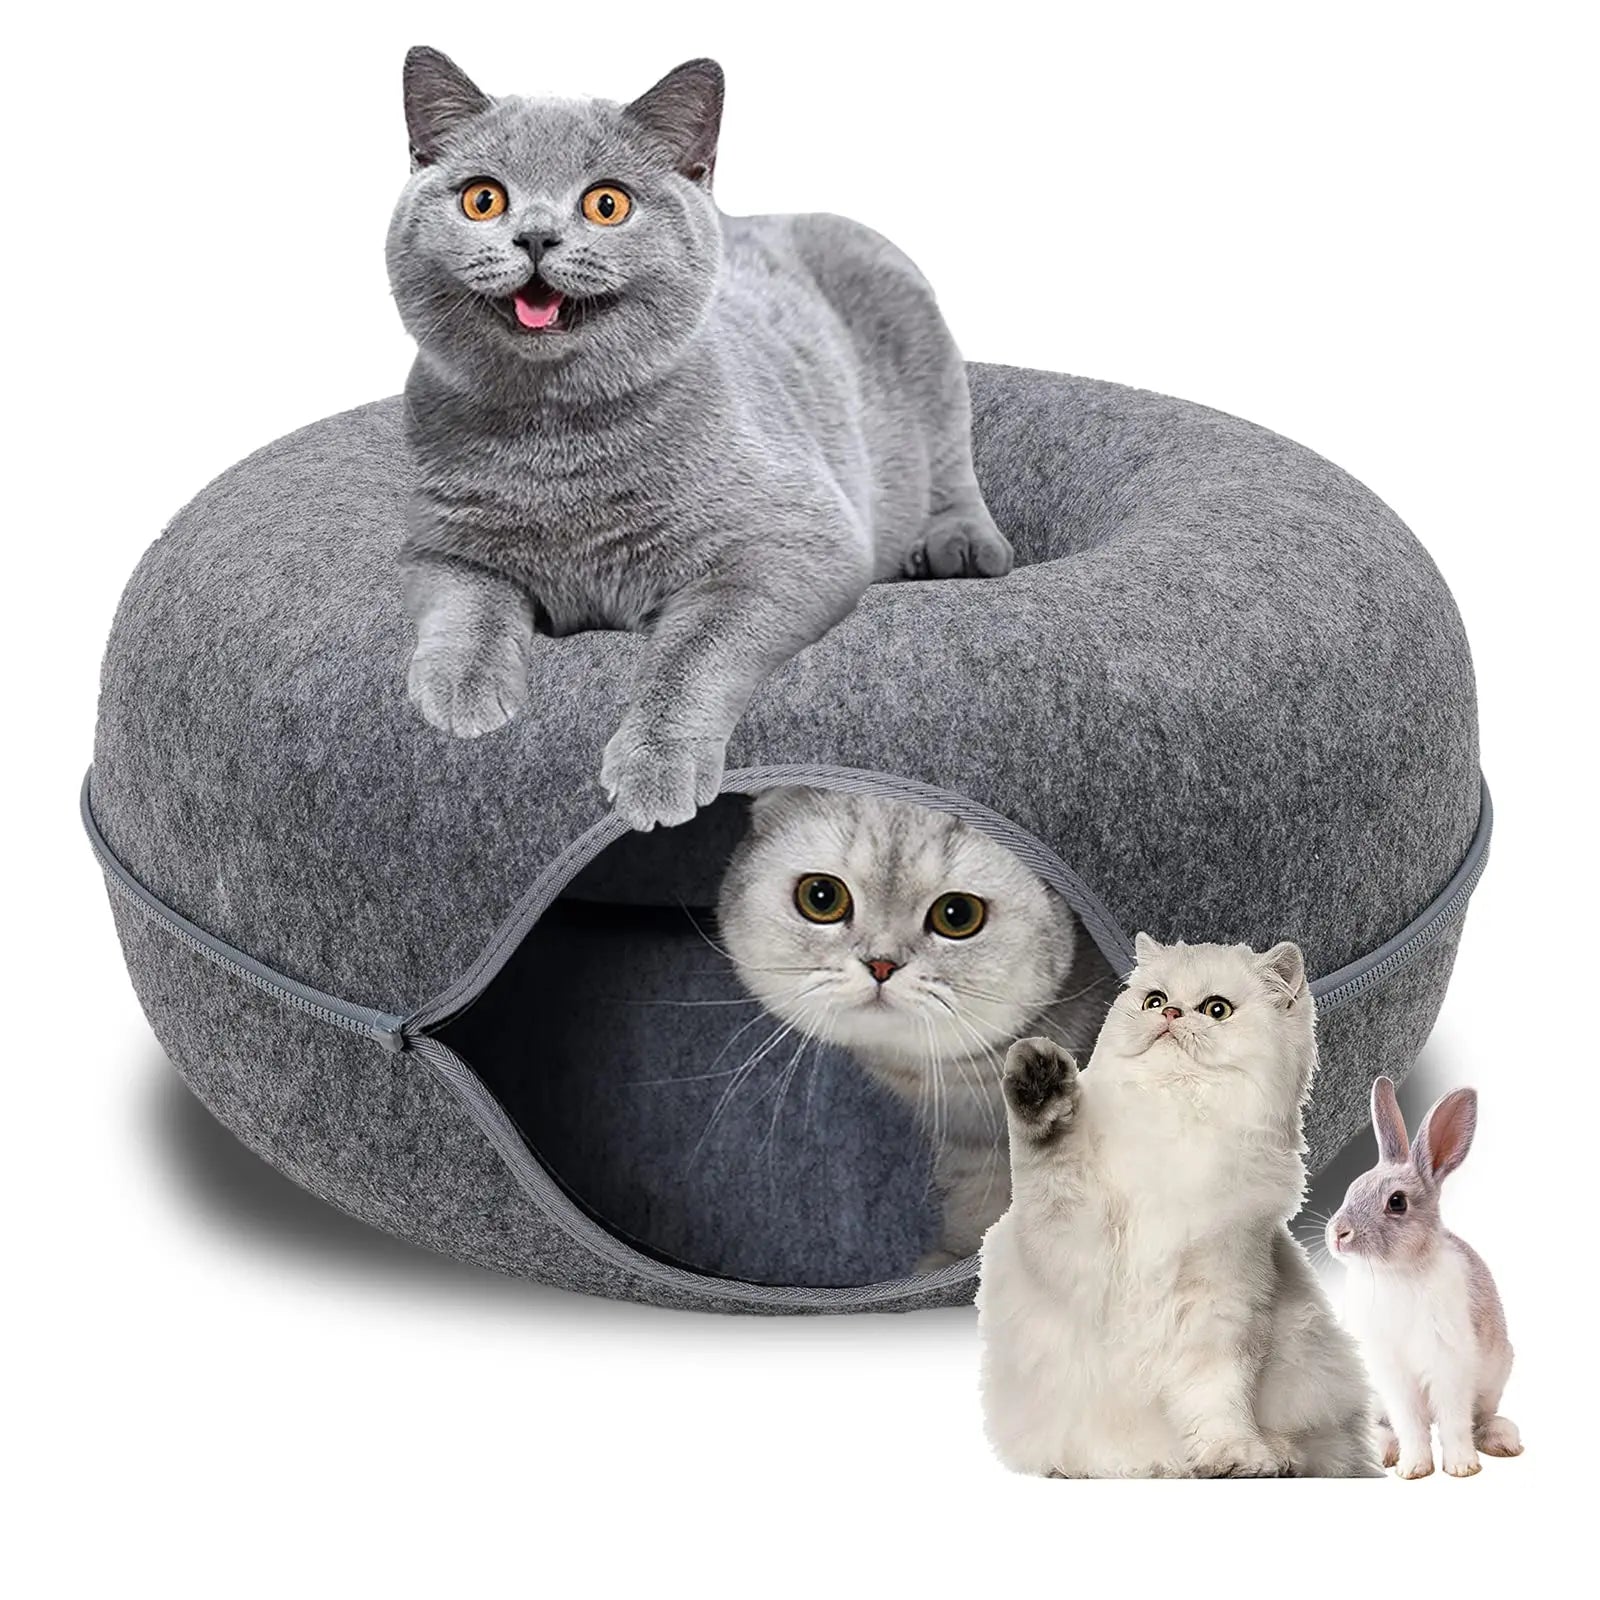 Big Tube Playground Warm Fluffy Plush Cat Dog Tunnel Bed with Washable Cushion Interior Cat Play Tunnel for Small Pets